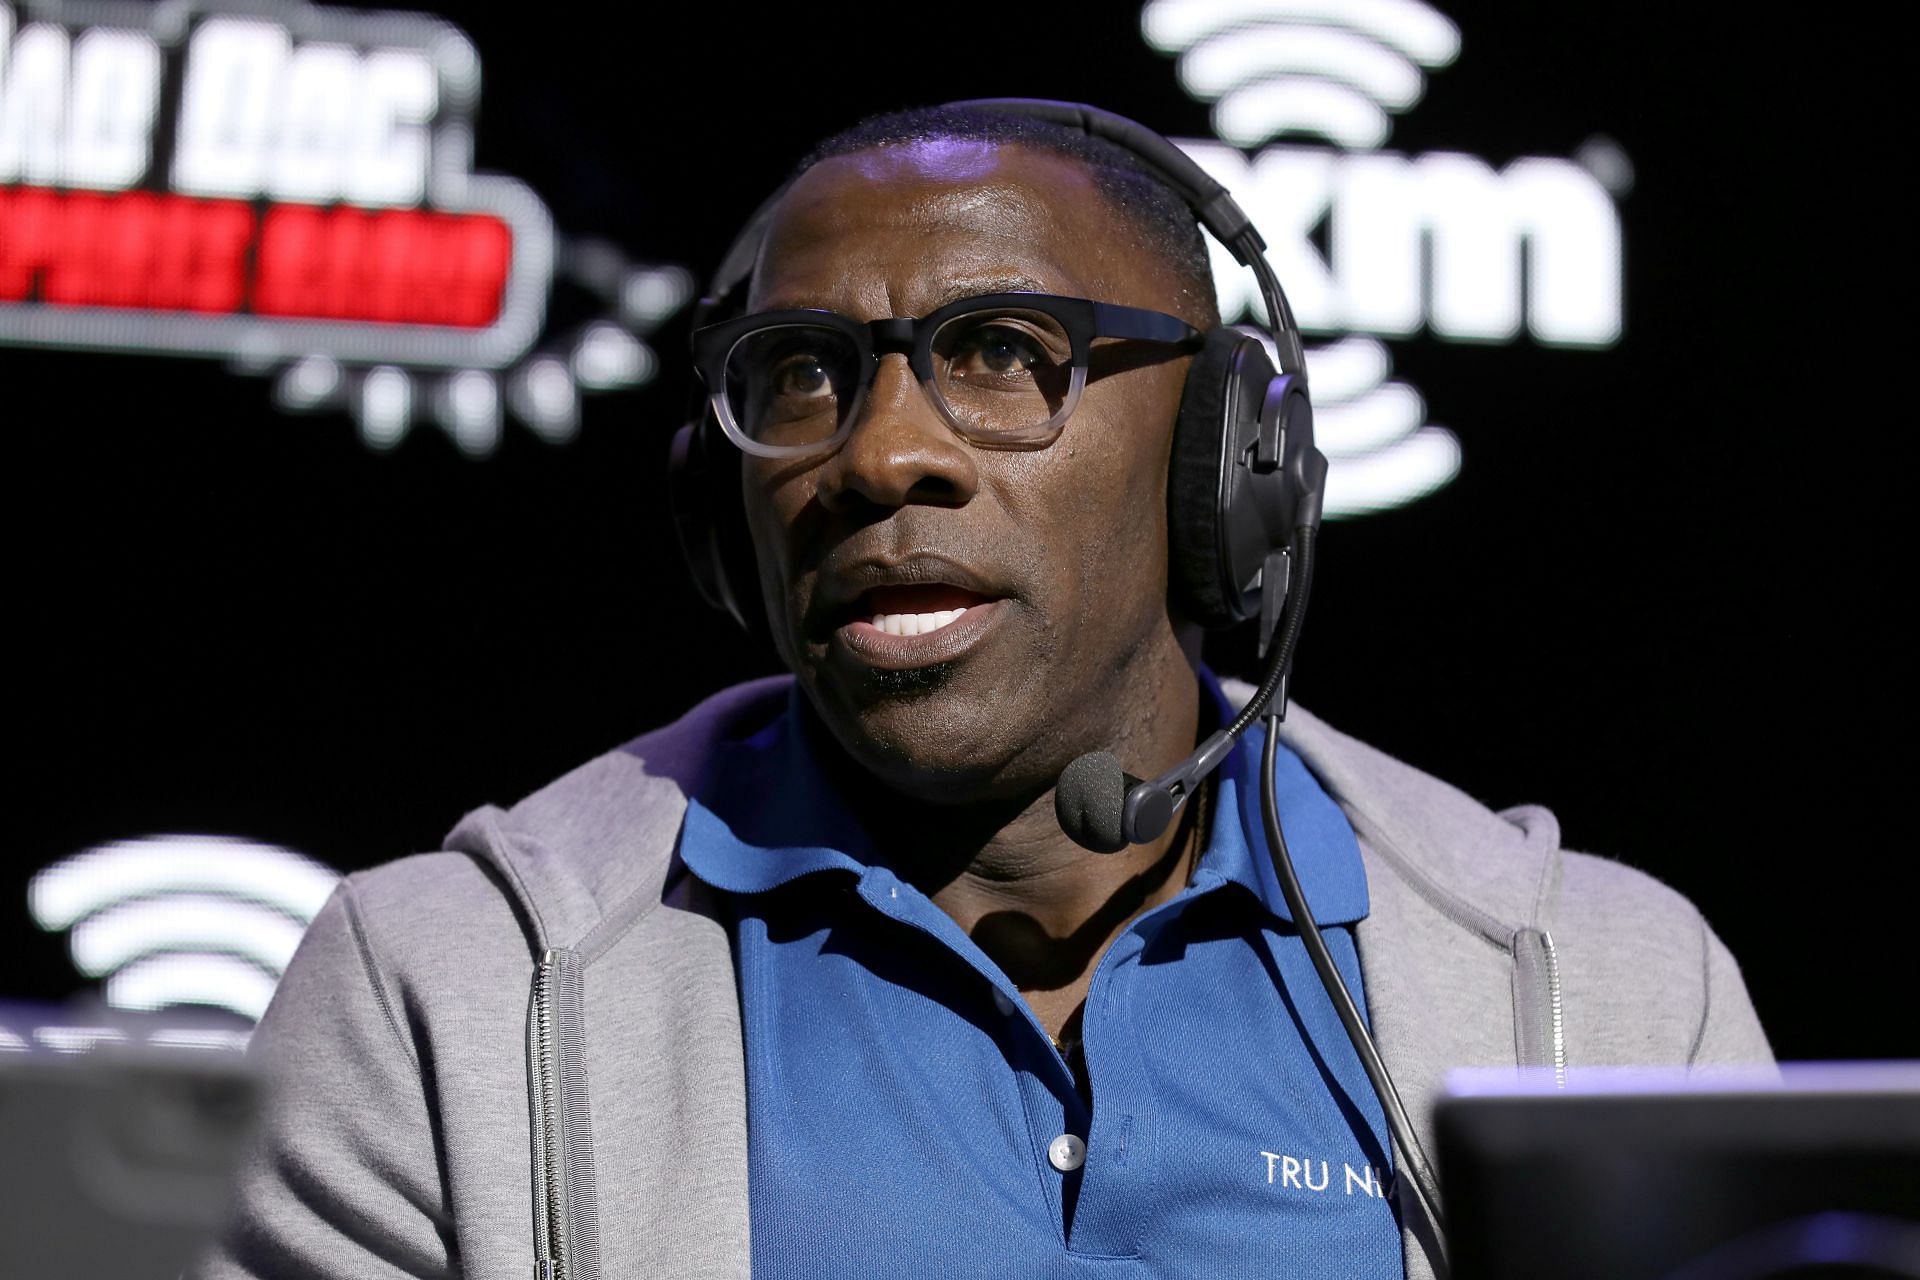 Former NFL player Shannon Sharpe at SiriusXM At Super Bowl LIV - Day 1